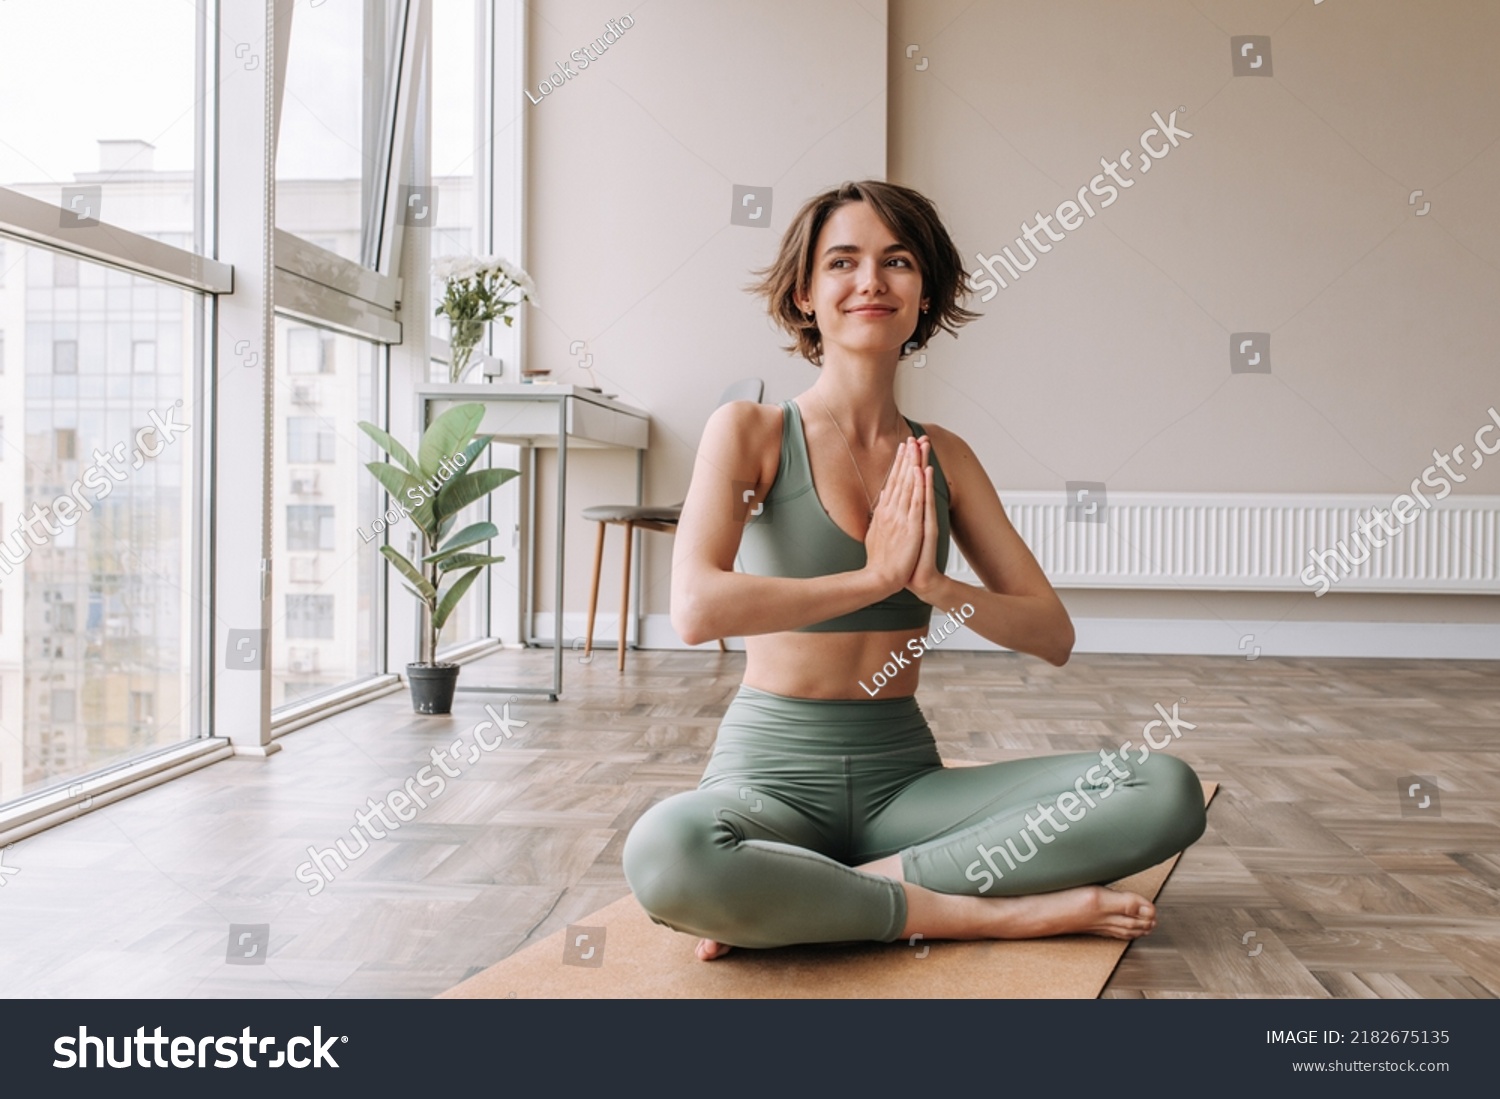 Pretty young brunette woman practicing yoga at home . Caucasian cute girl looking away and smiling wearing green sportswear sitting on the floor. Concept of leisure, relaxation, workout  #2182675135